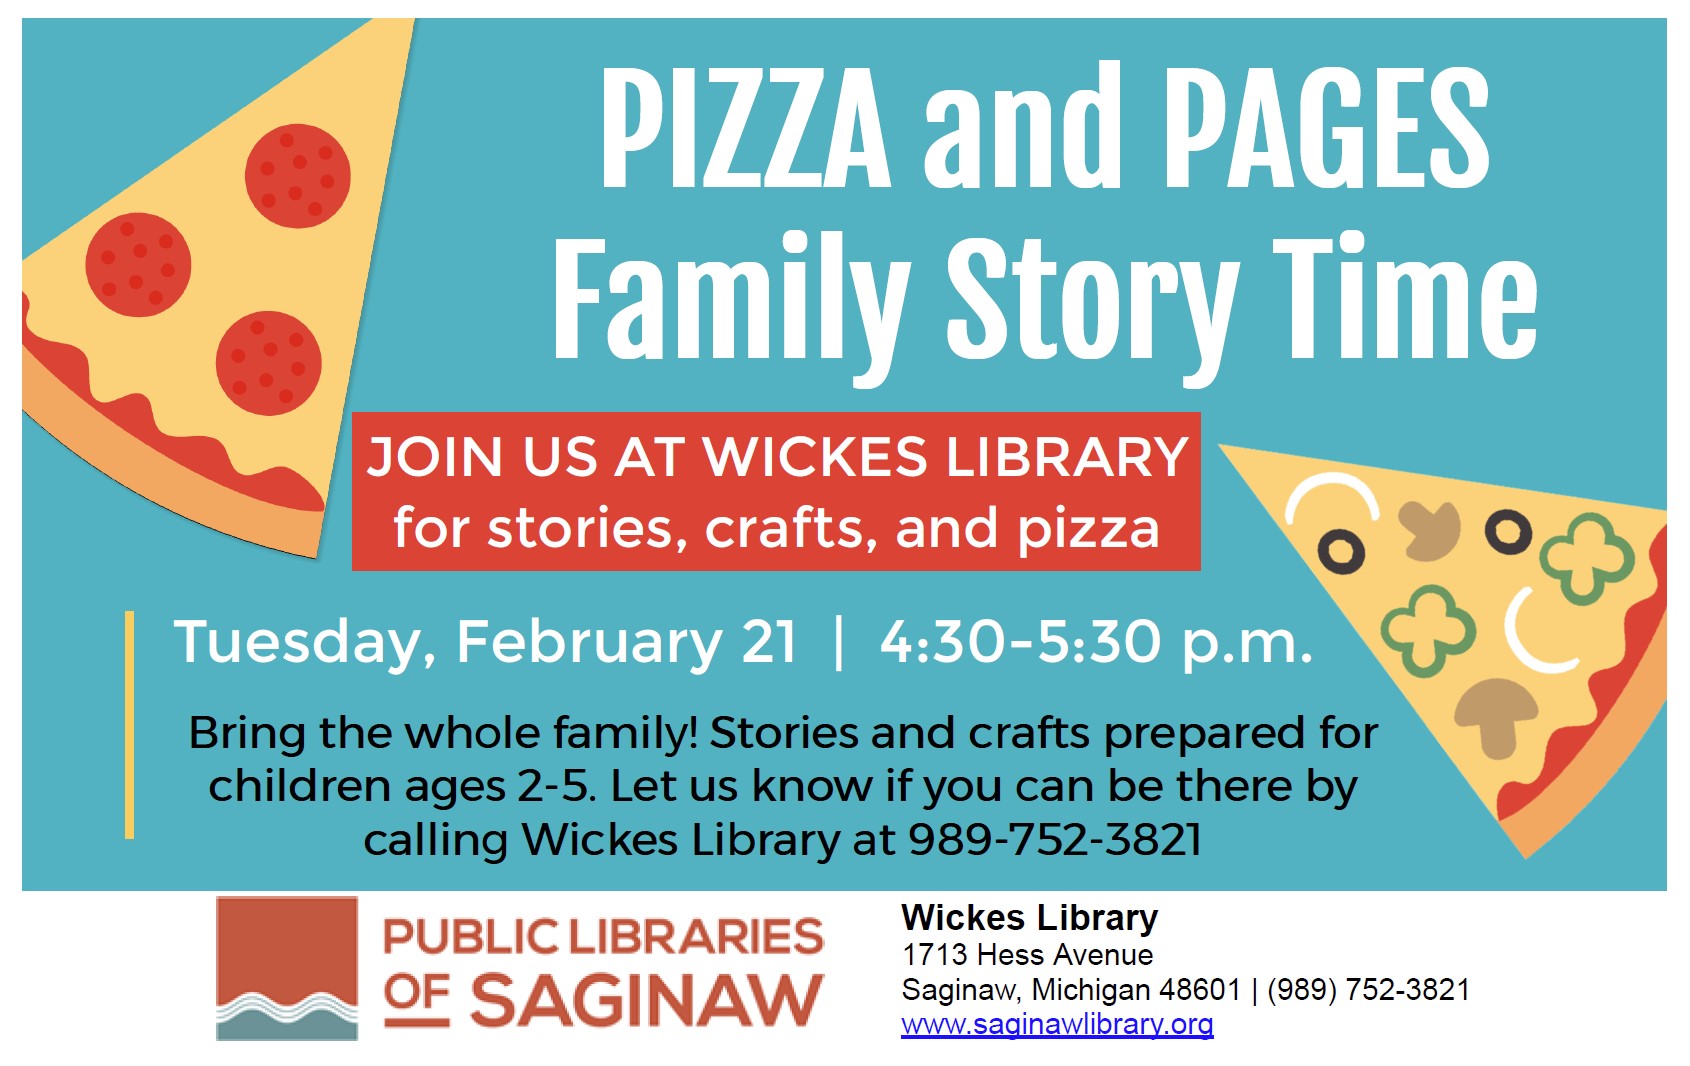 PIZZA and Pages Family Story Time at Wickes Library February 21 from 4:30 to 5:30 p.m.